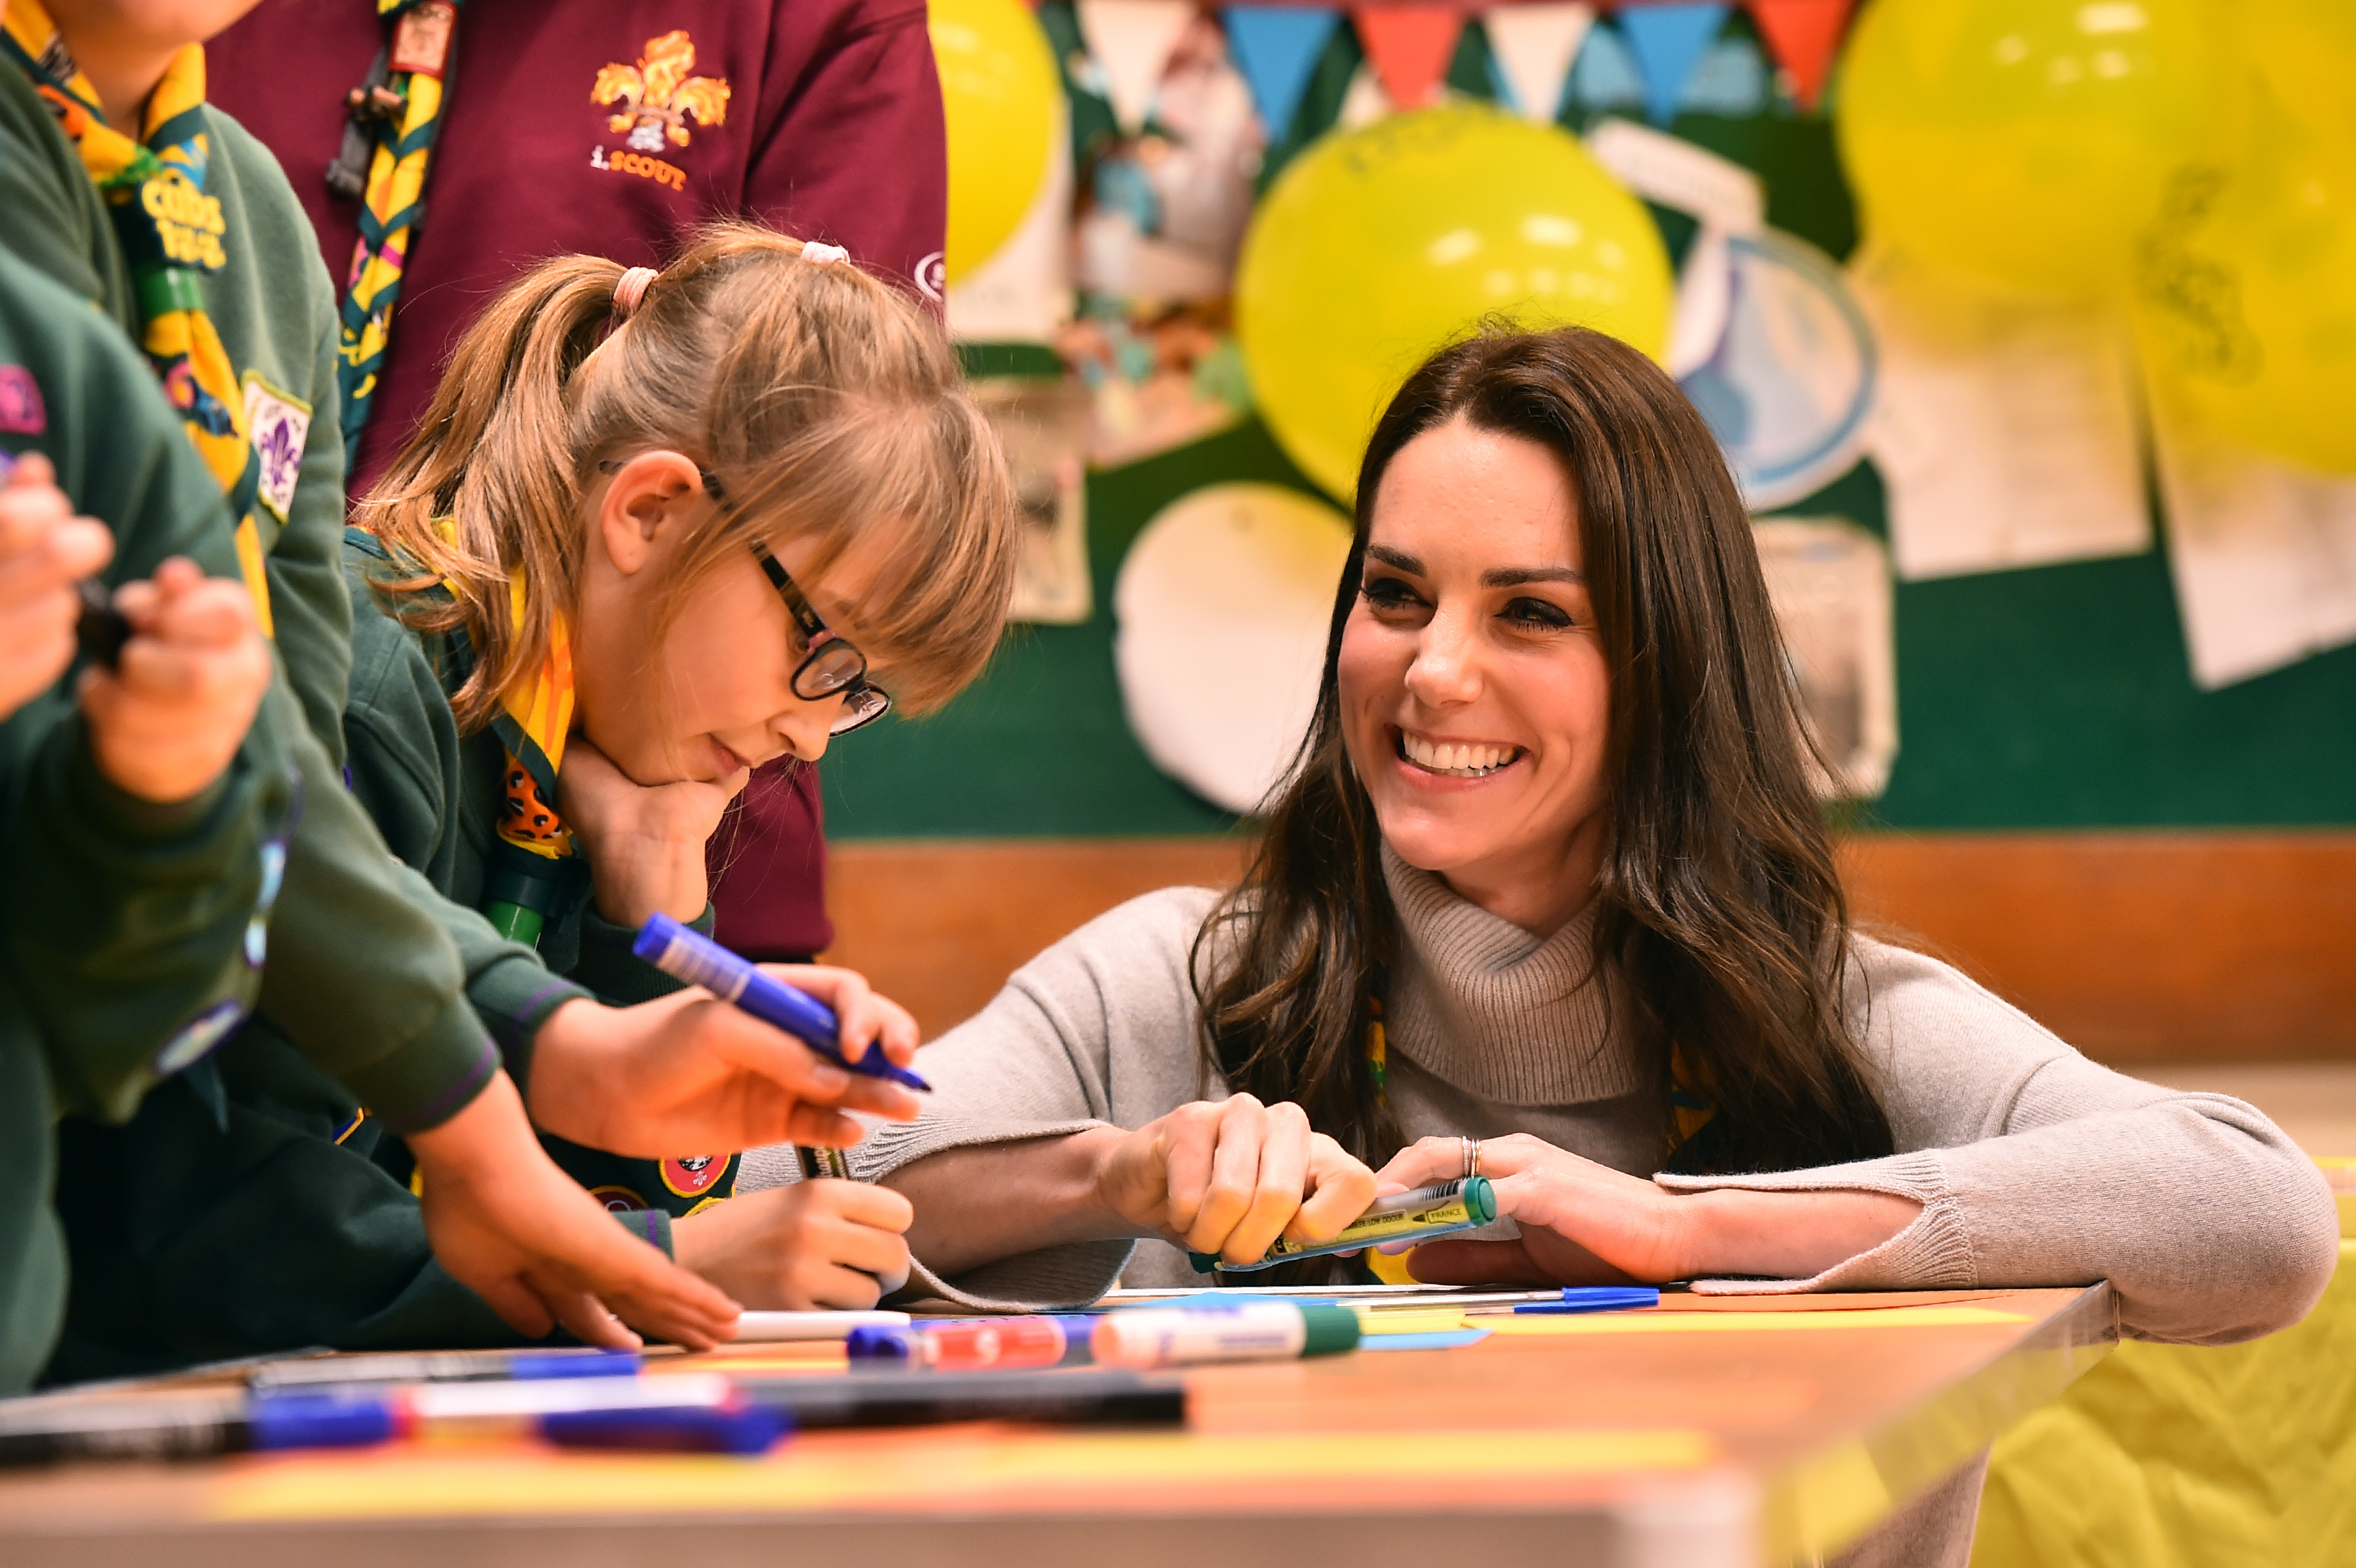 Kate Middleton during a visit to a Cub Scout Pack meeting on December 14, 2016, in King's Lynn, England. | Source: Getty Images